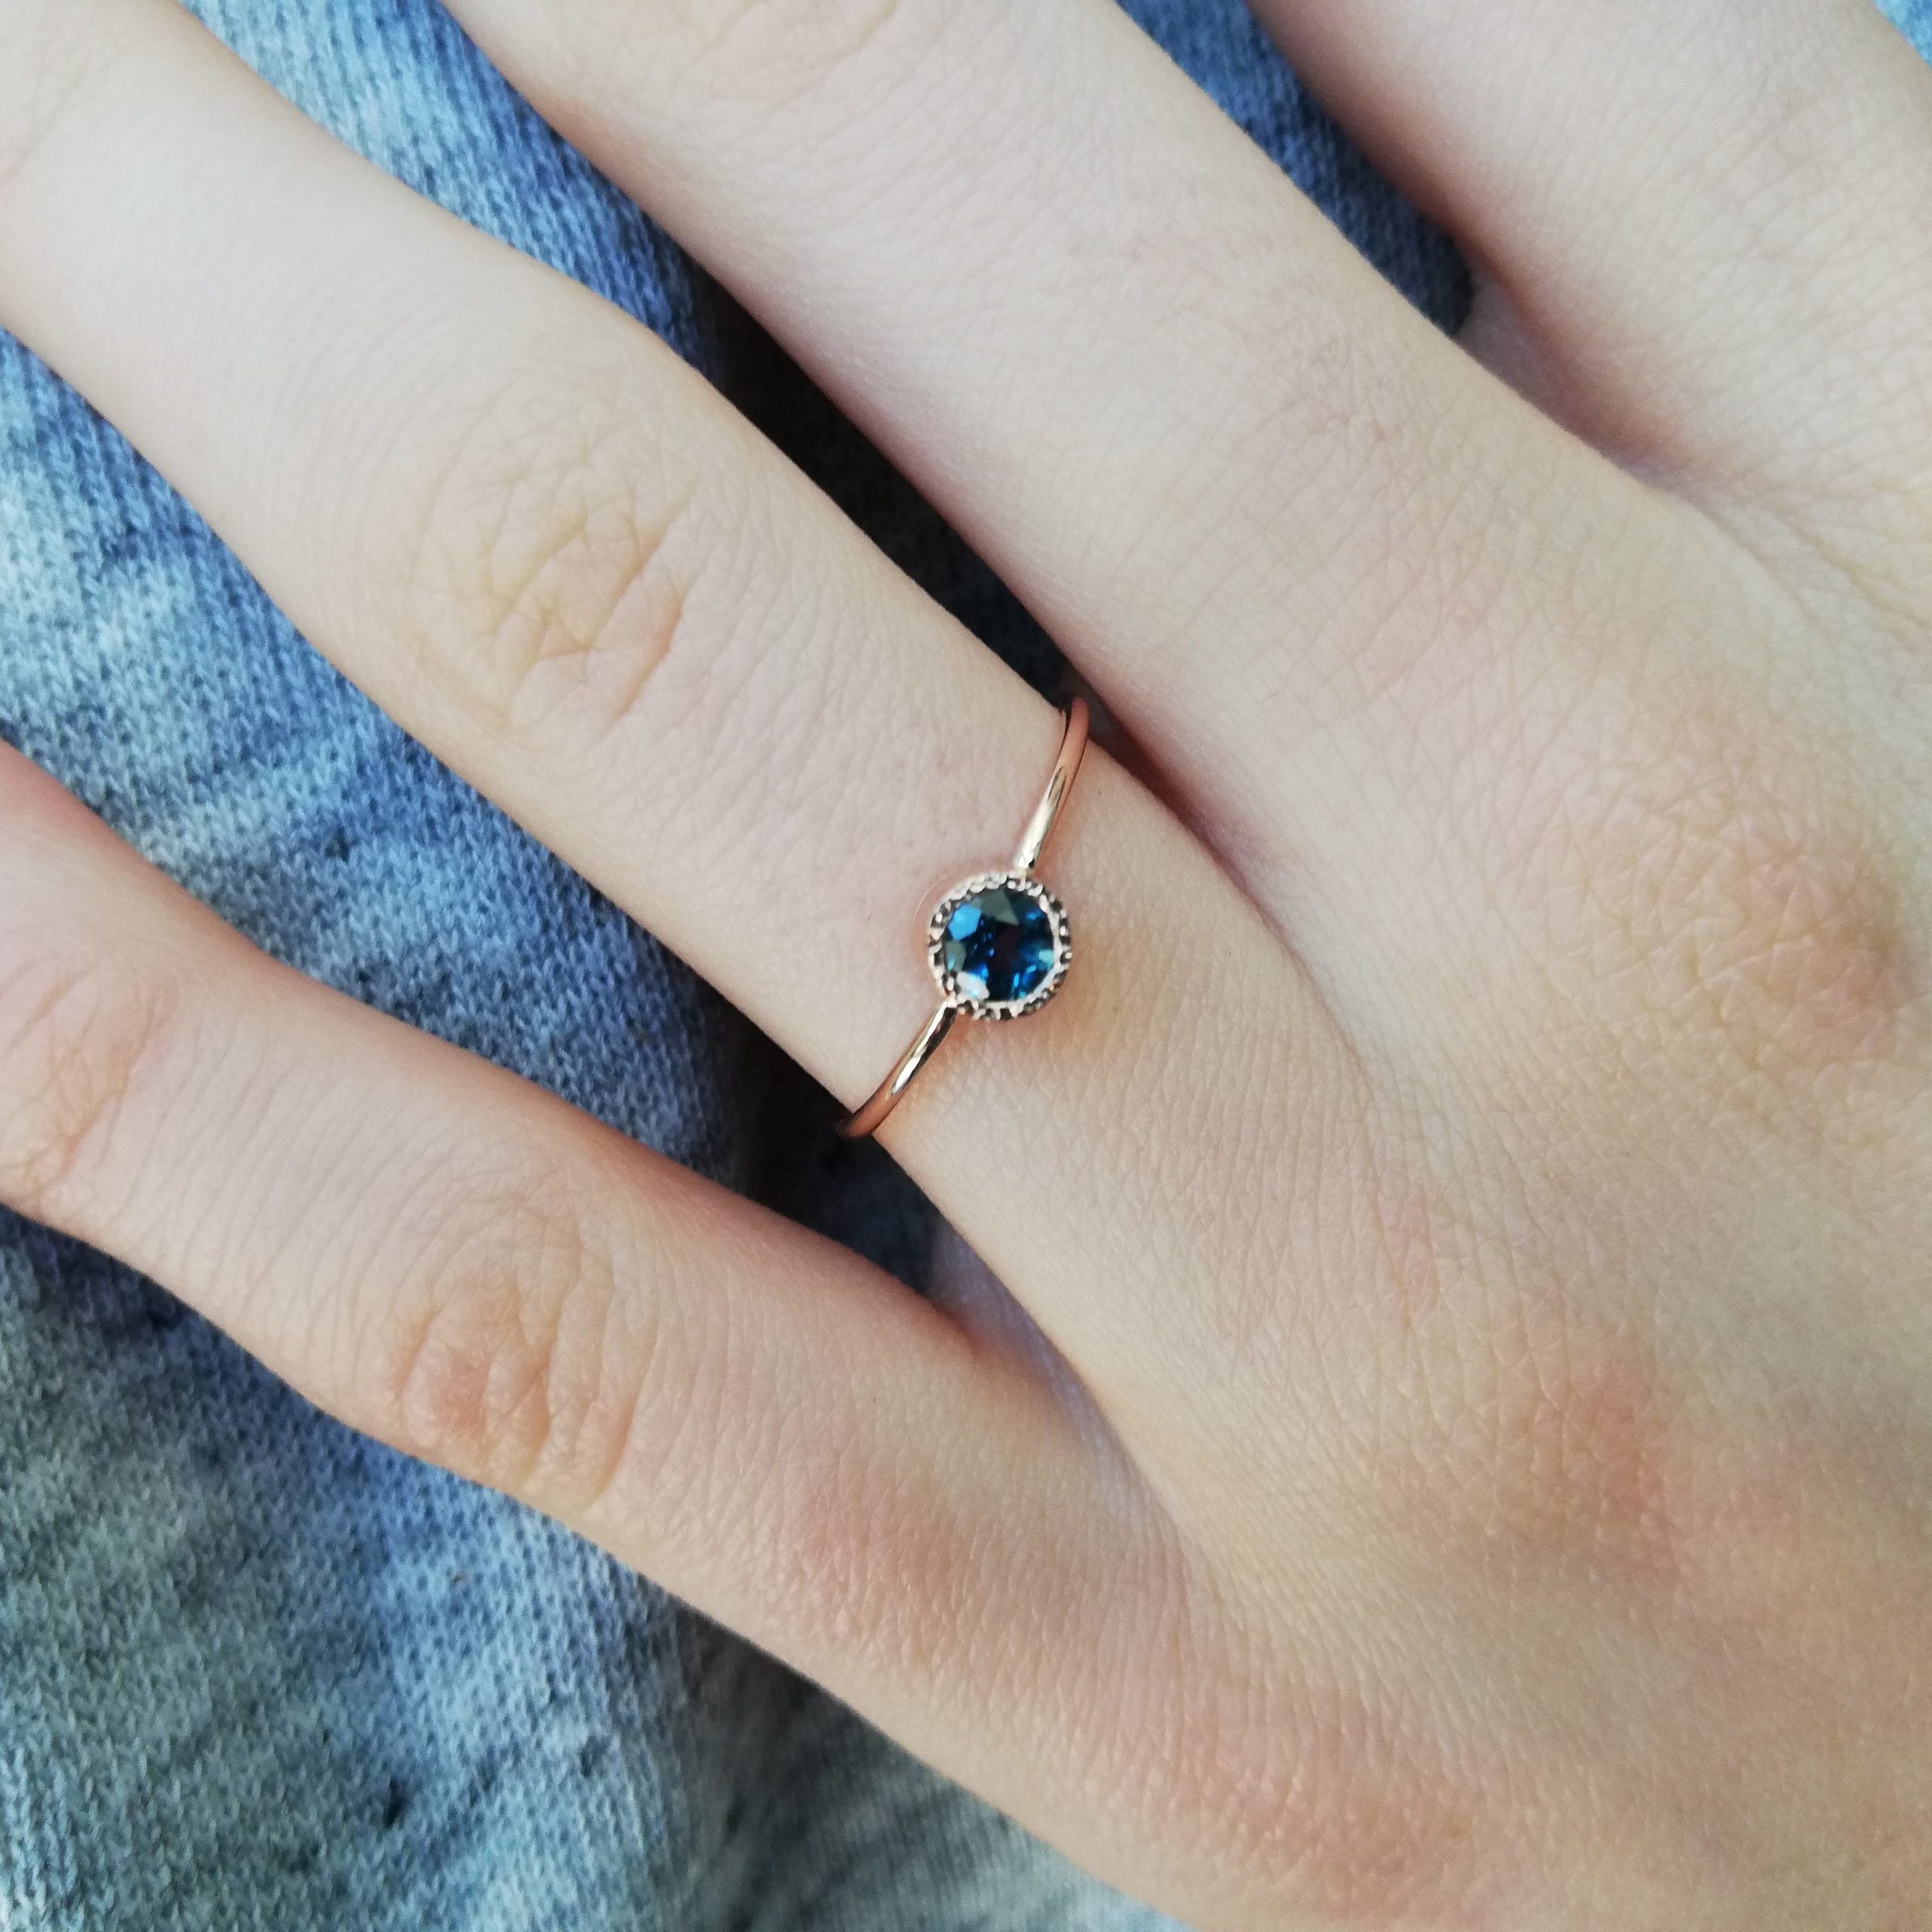 London Blue Topaz Engagement Ring, Gold Birthstone Ring, Handmade Ring Pertaining To Blue Topaz Rings With Braided Gold Band (View 9 of 25)